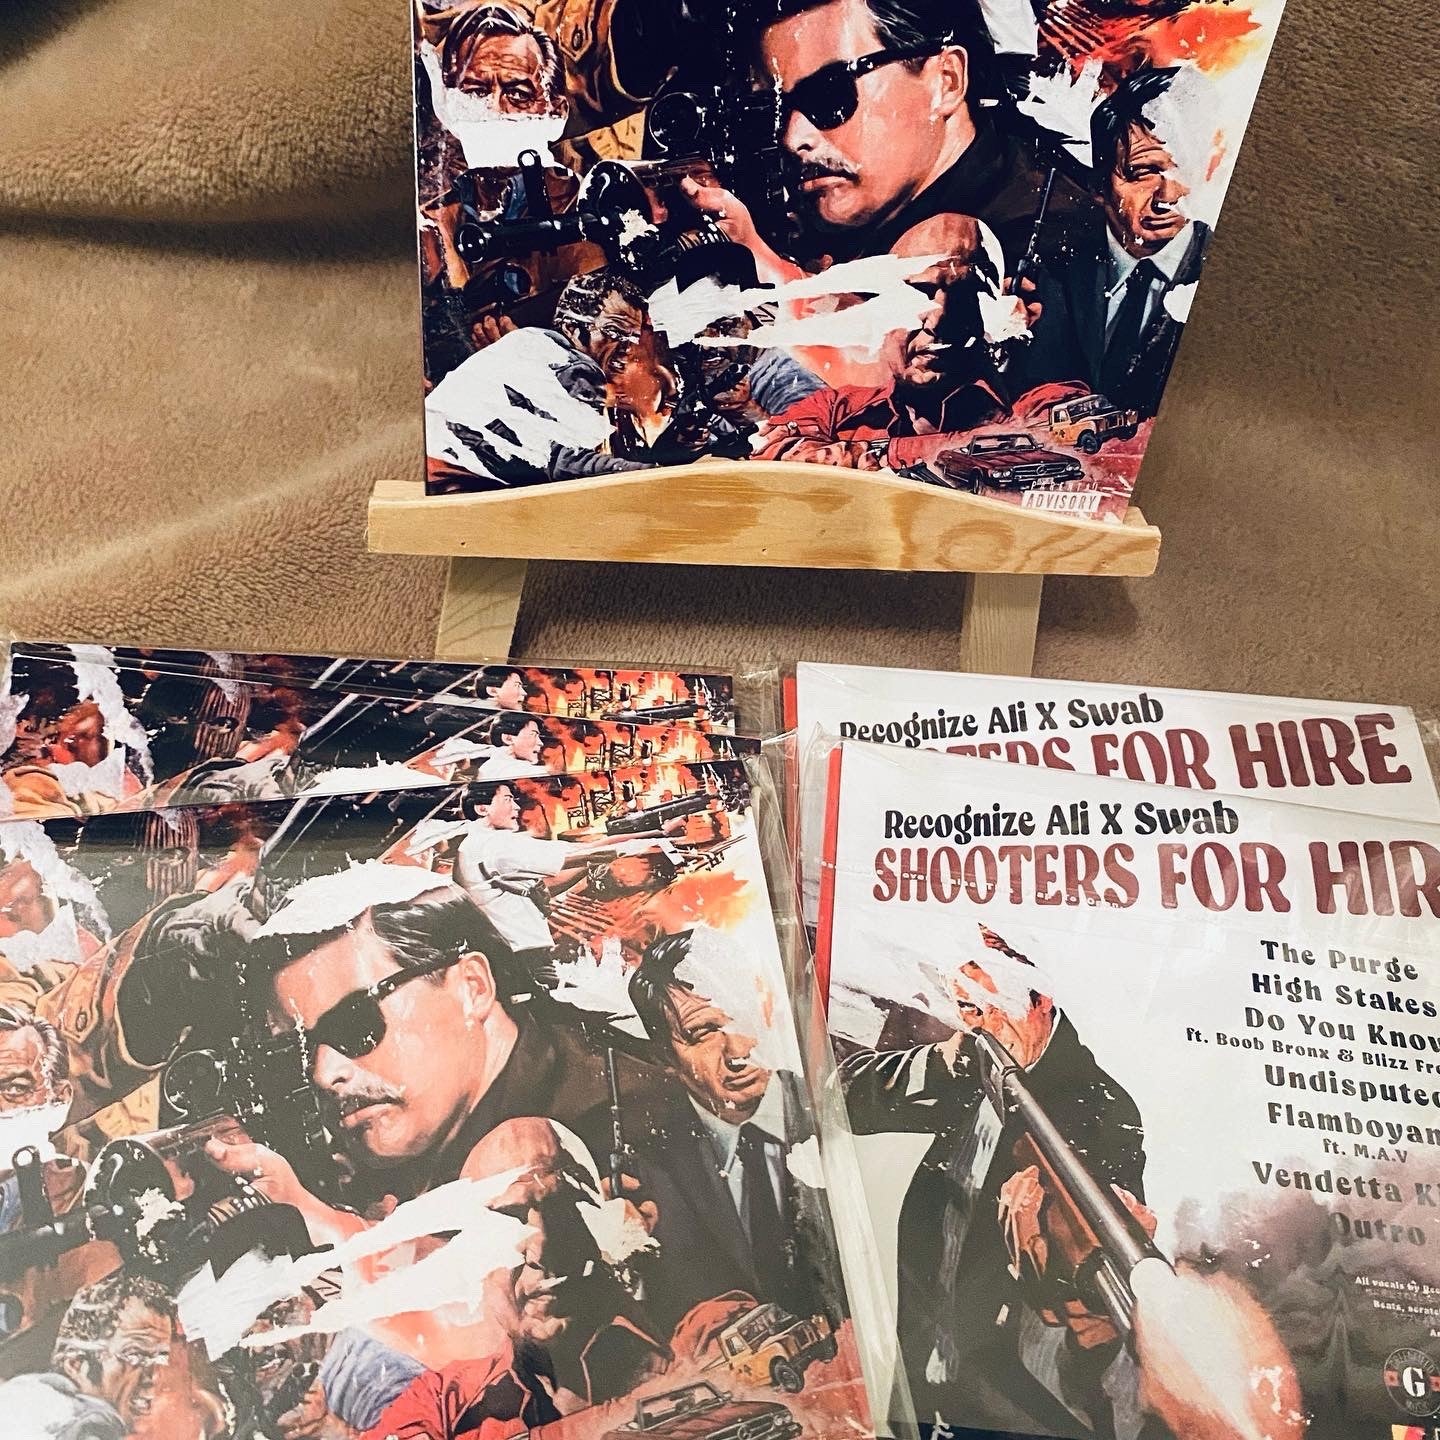 Recognize Ali x Swab - Shooter For Hire EP (CDs)